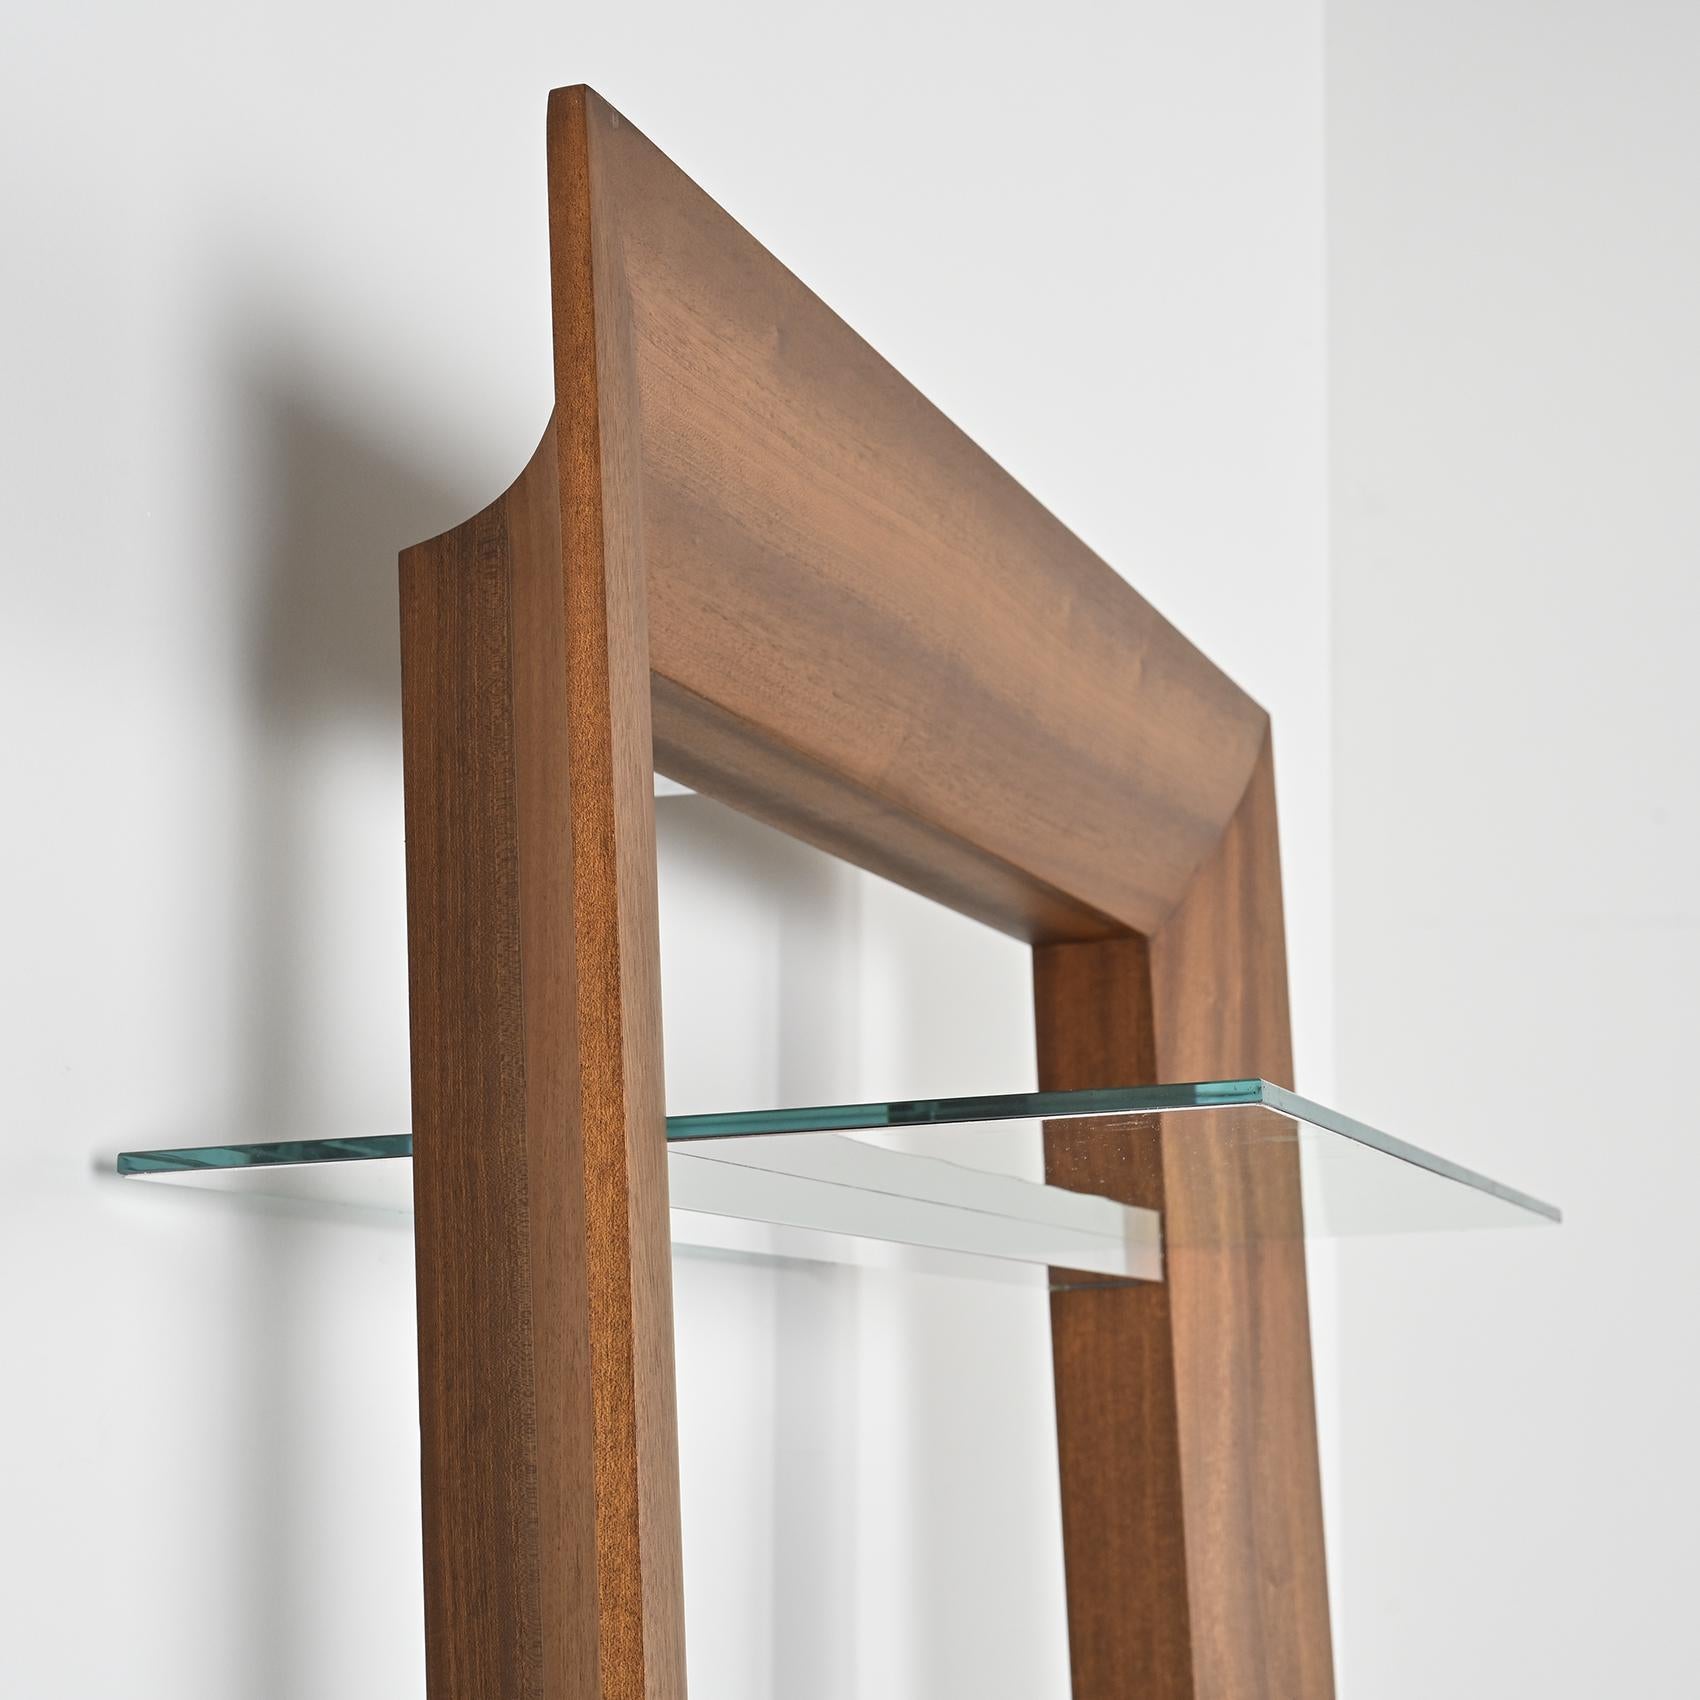 Contemporary A Pair of Modular Mirror-Bookshelves by Philippe Starck, Driade 2007